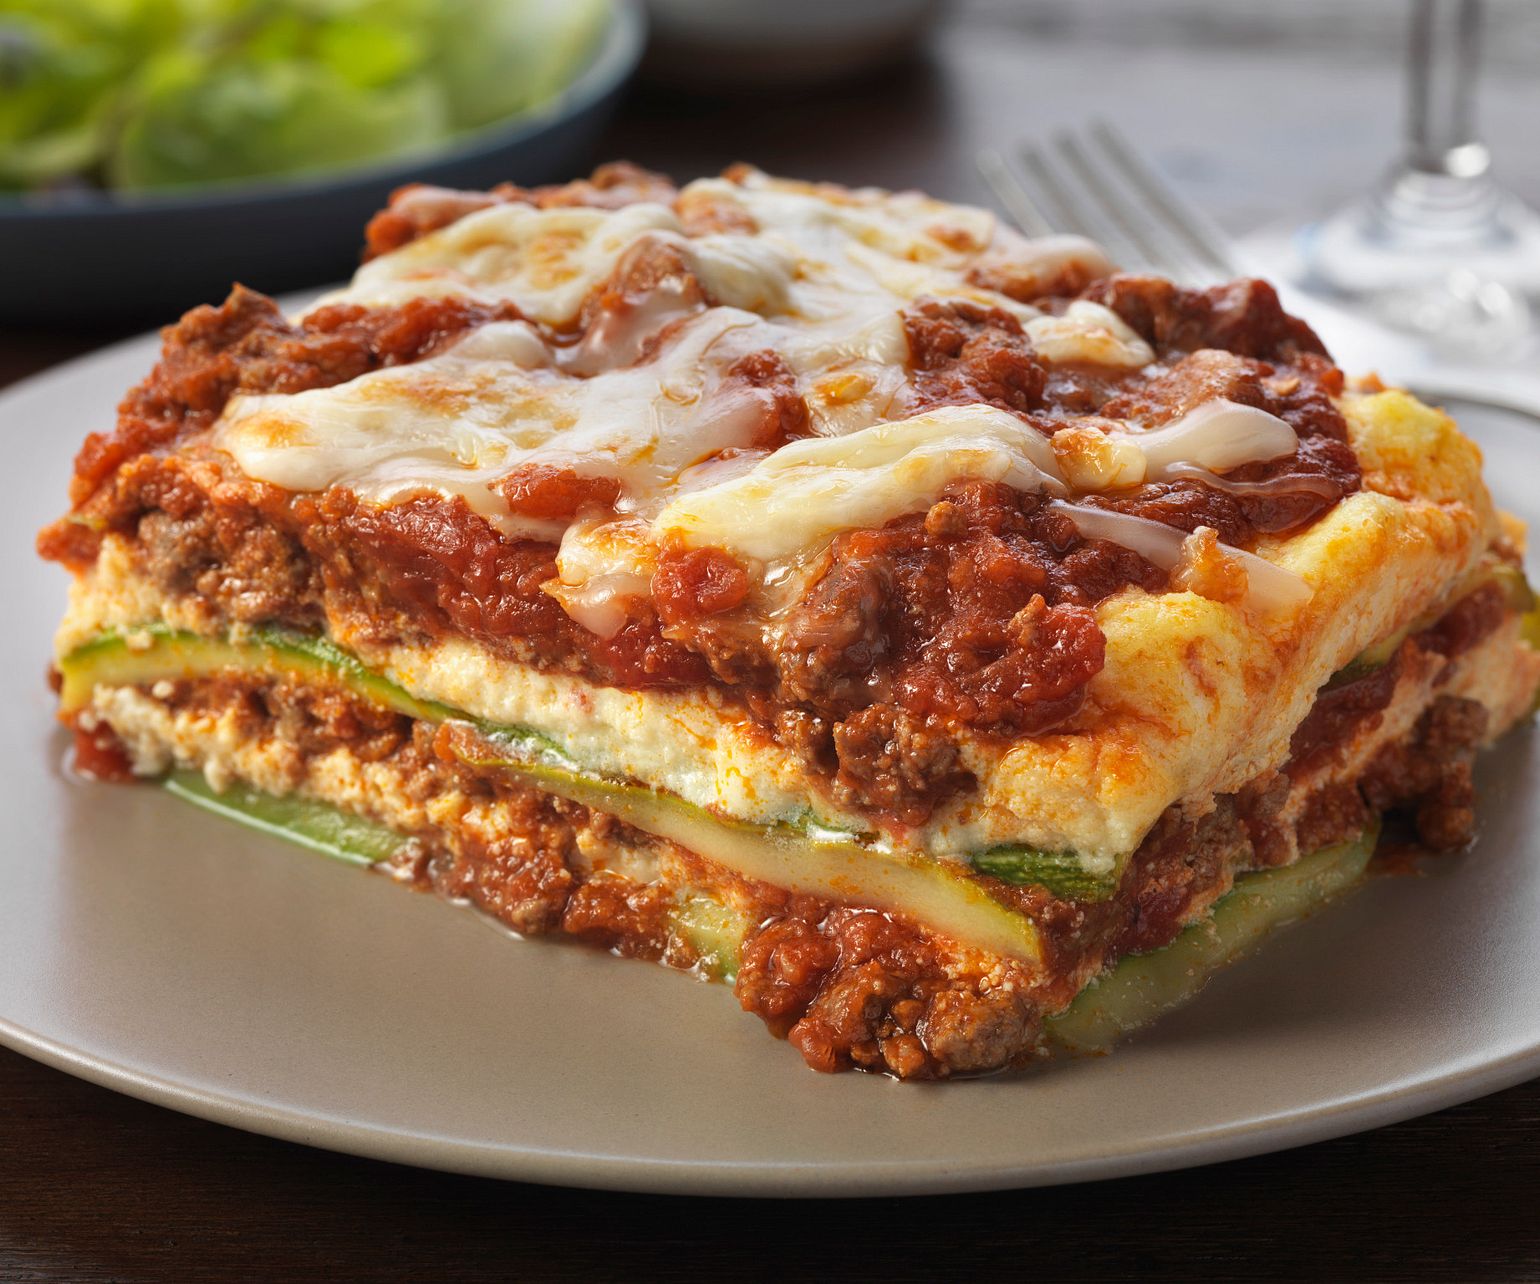 Beef and Zucchini “Noodle” Lasagna